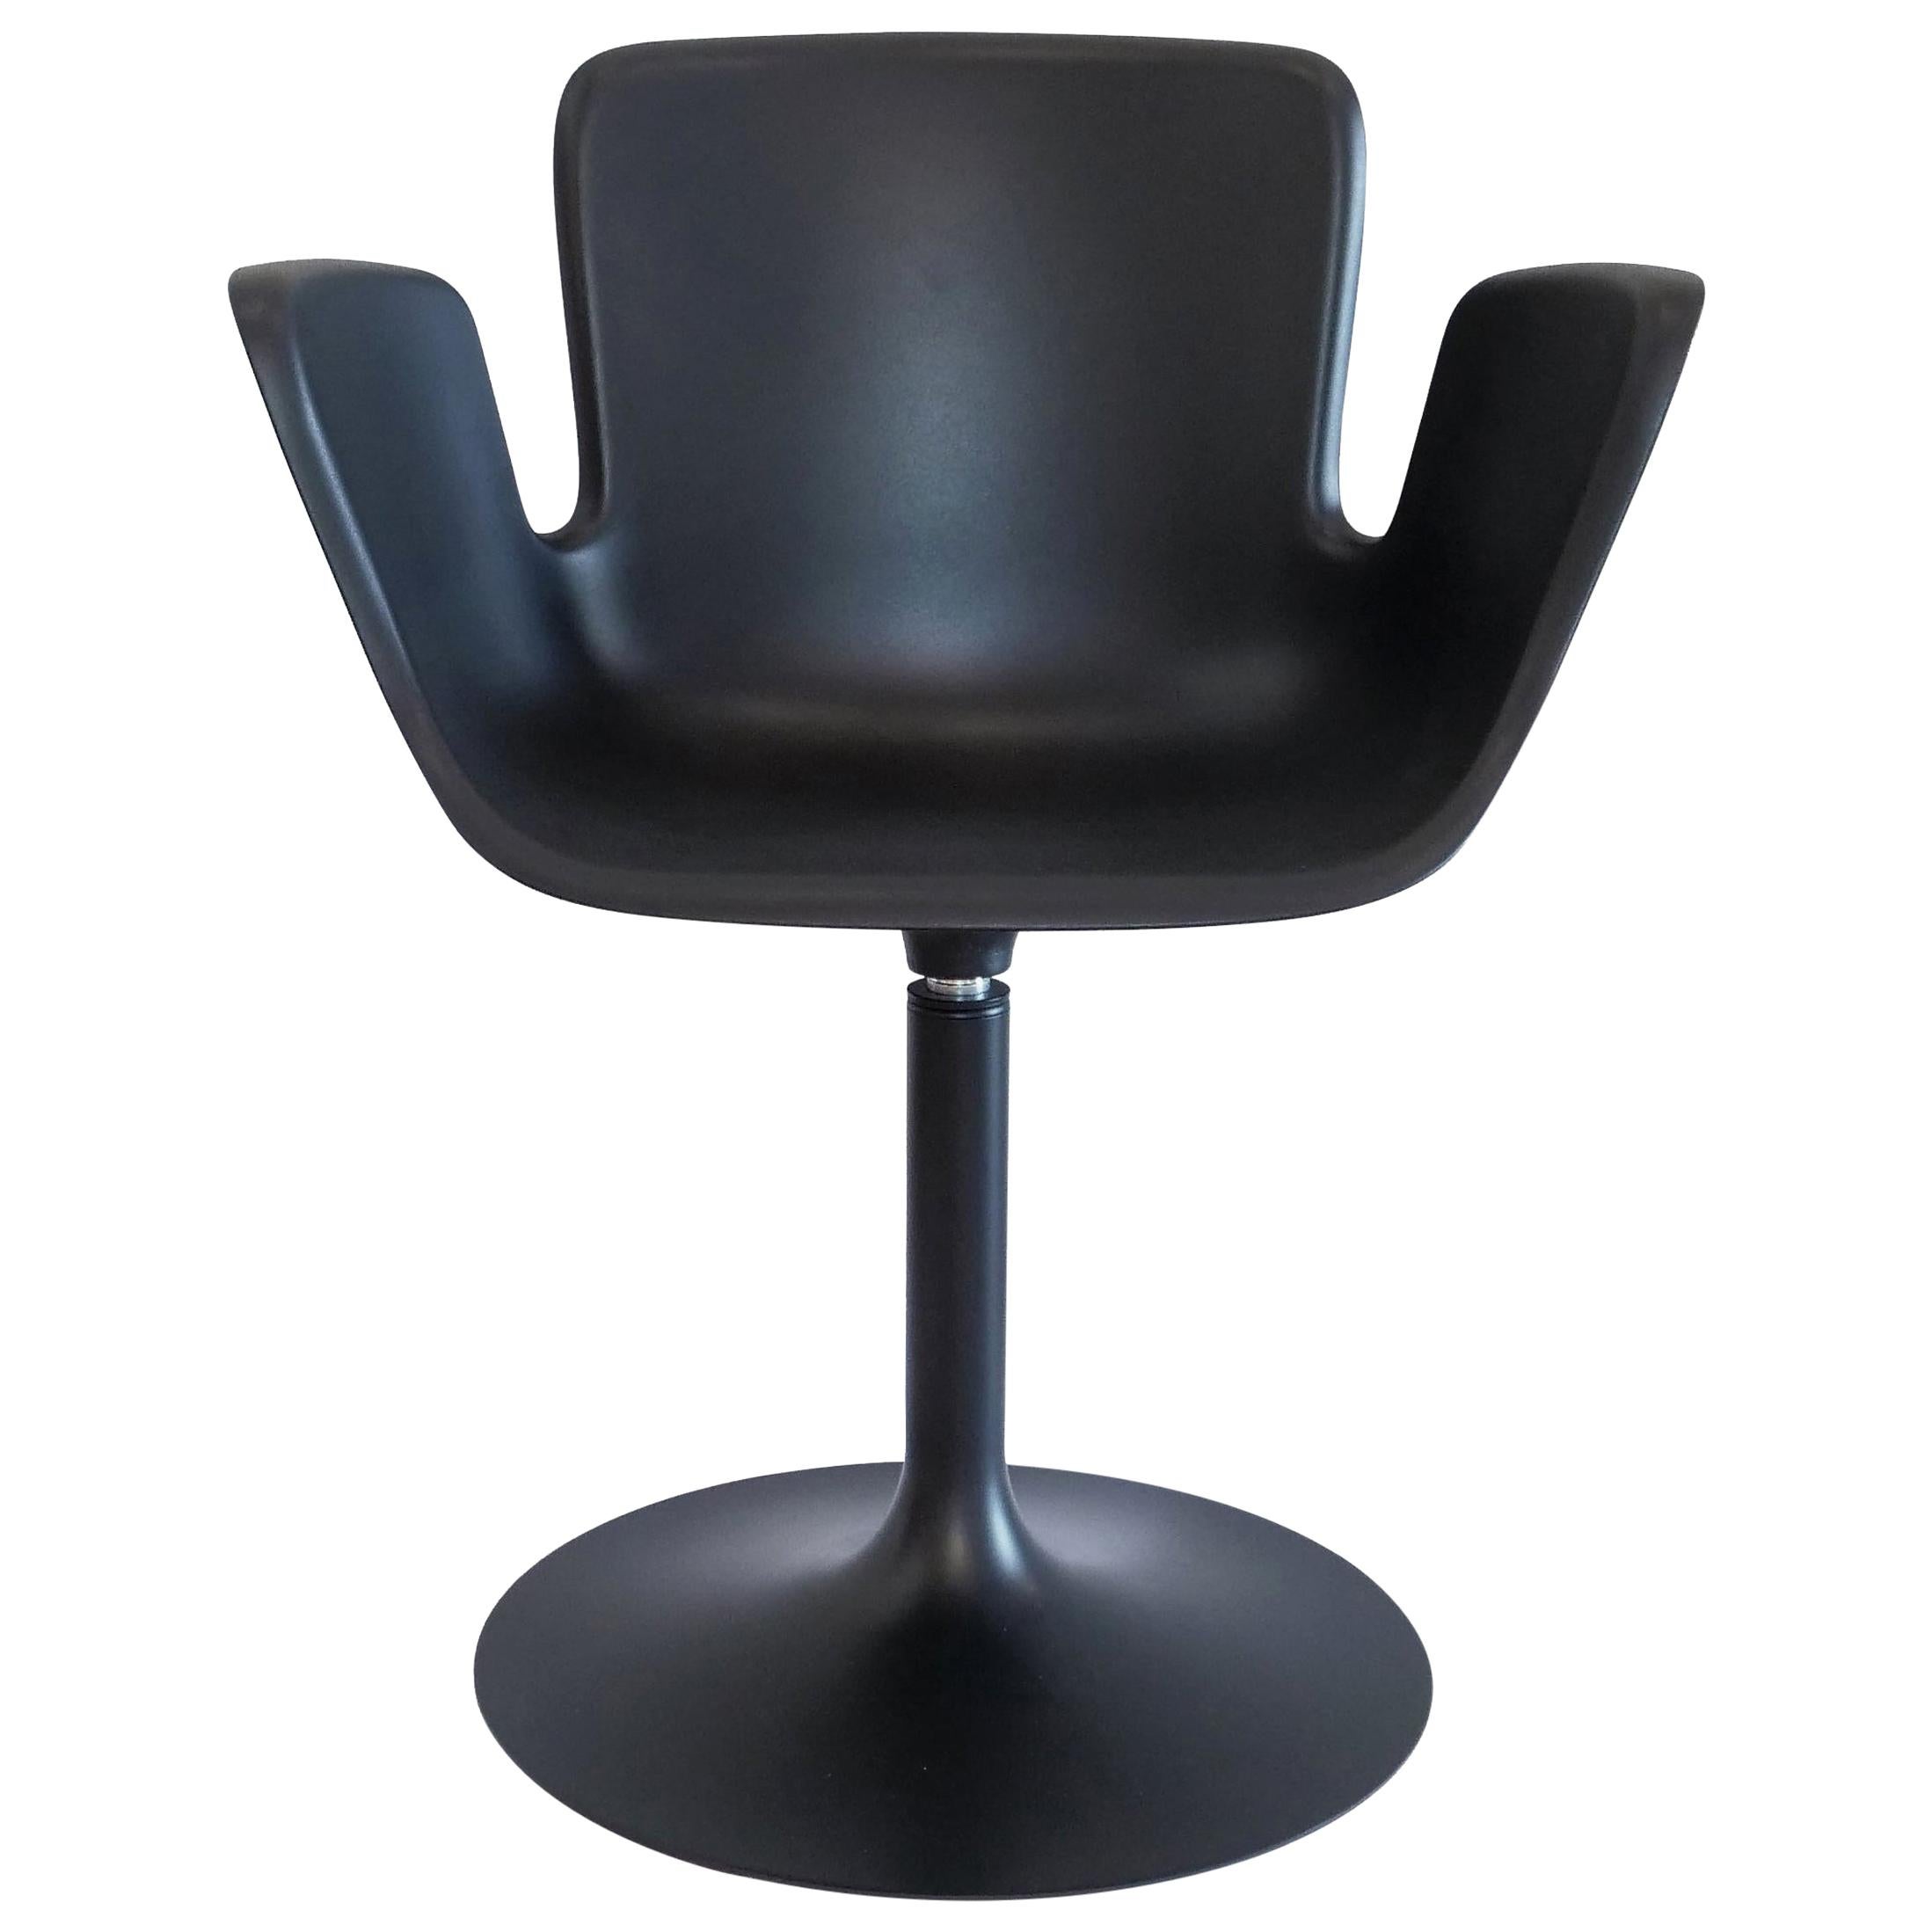 Werner Aisslinger Juli Plastic Chair in Anthracite Metal Base by Cappellini For Sale